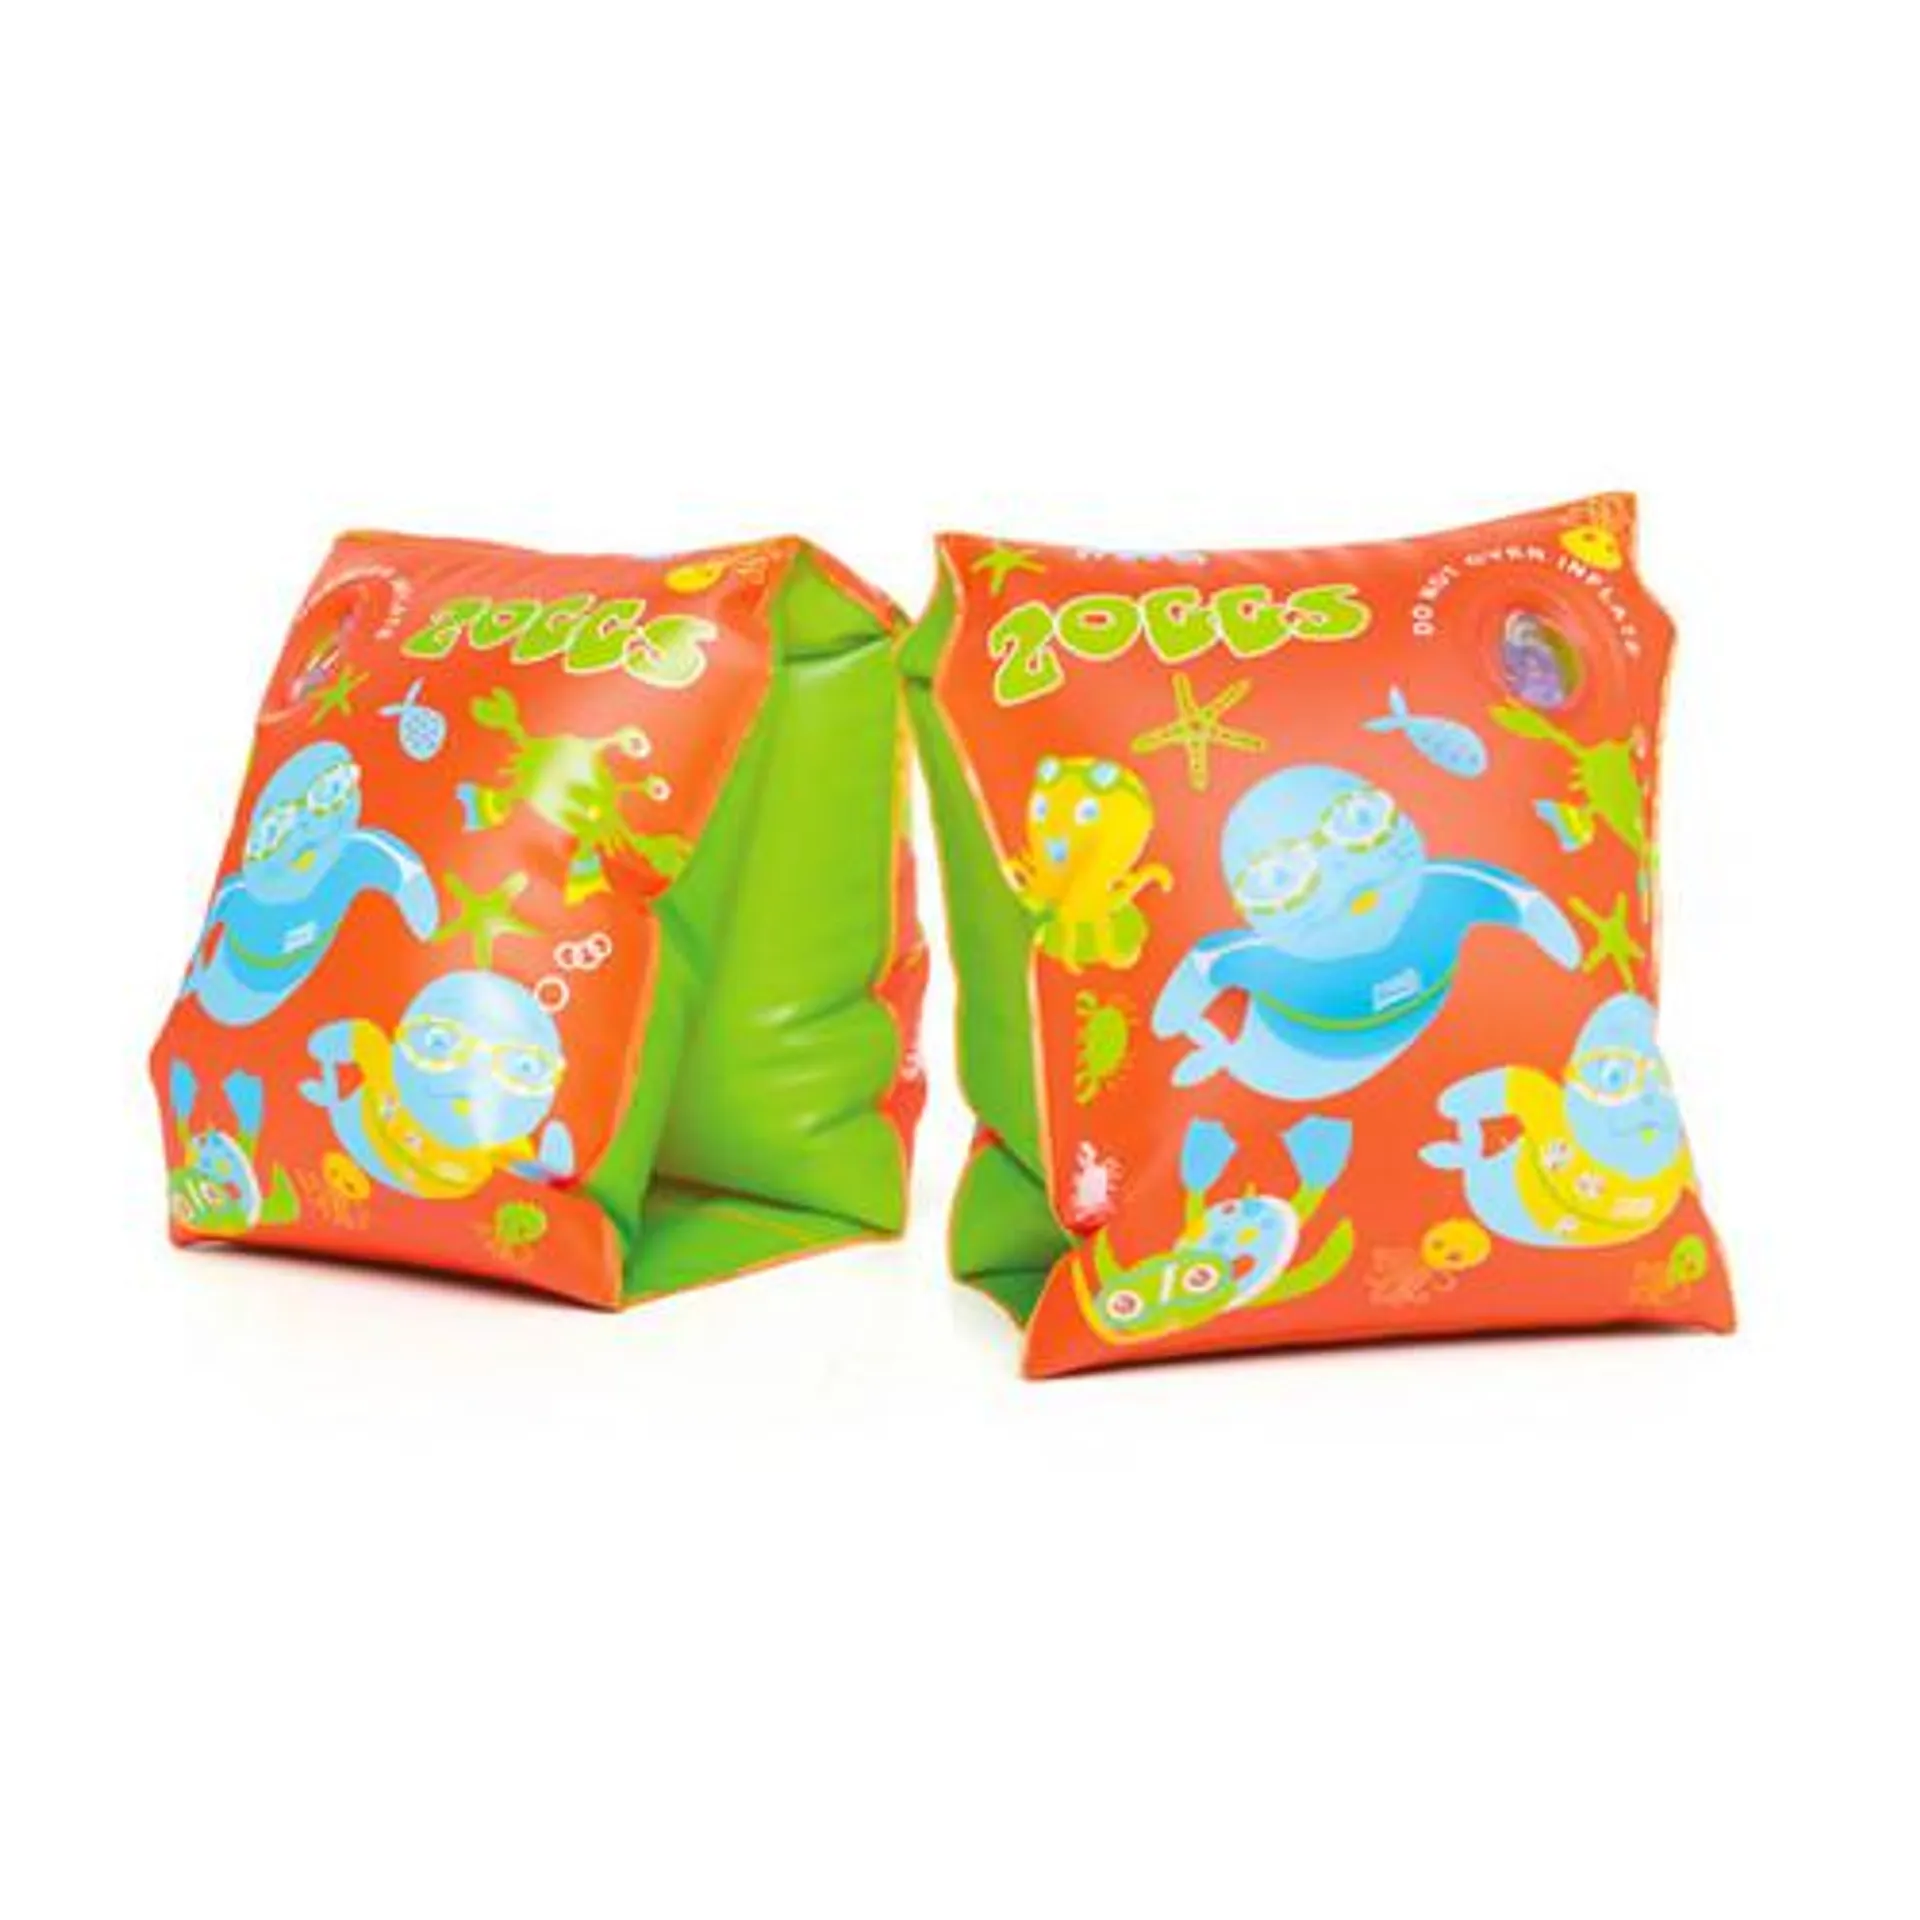 Zoggs Zoggy Armbands - Orange/Green - 1-6 Years